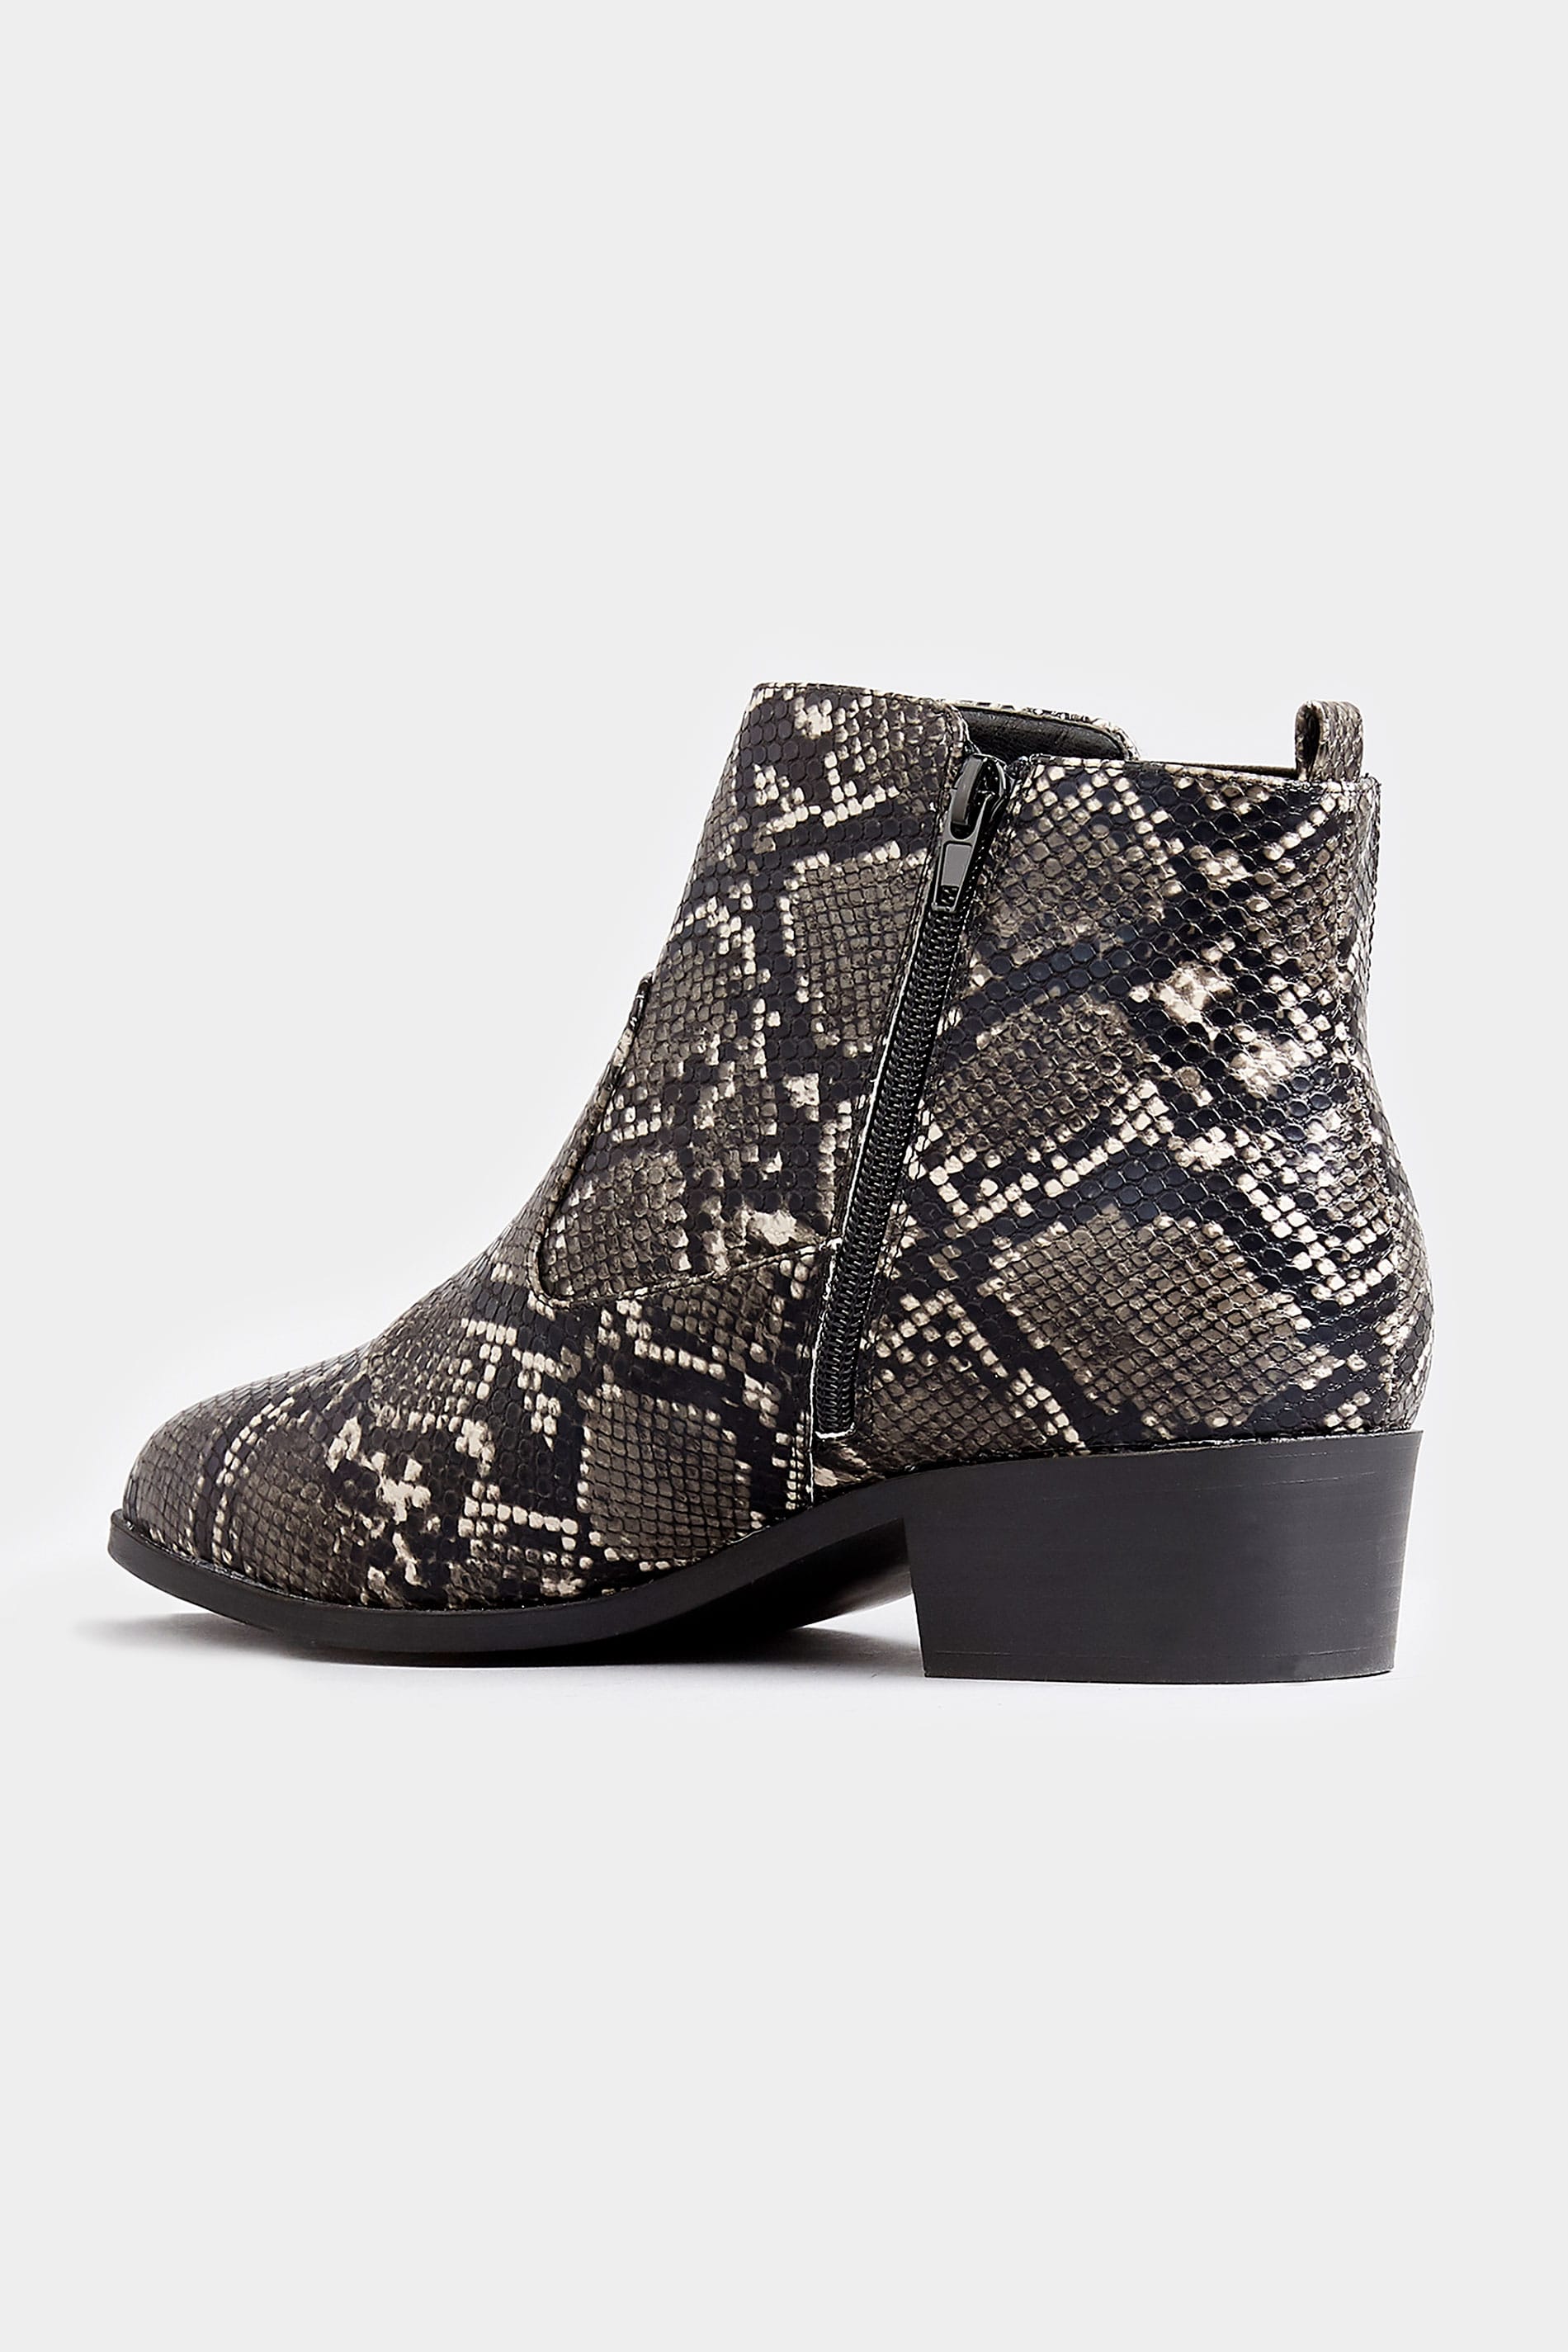 Grey Snakeskin Effect Chelsea Boots In Extra Wide Fit | Long Tall Sally